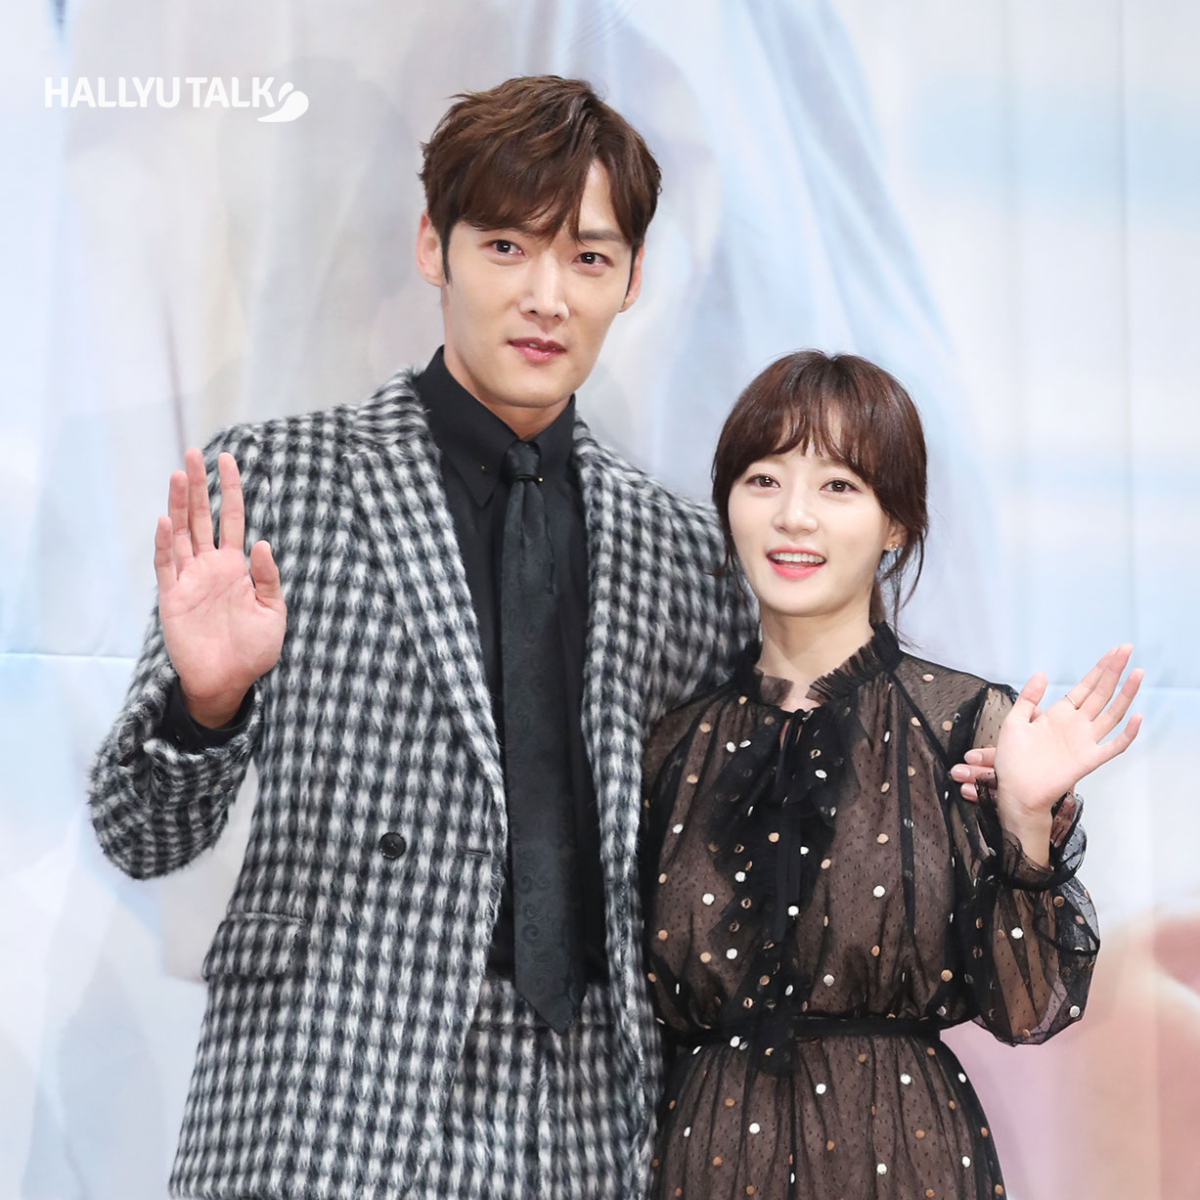 Actors Choi Jin-hyuk and Song Ha-yoon (right) are posing at the production presentation of MBN&#039;s Wednesday and Thursday drama &#039;Devilish Joy&#039; held at Imperial Palace Seoul, Gangnam-gu, Seoul.